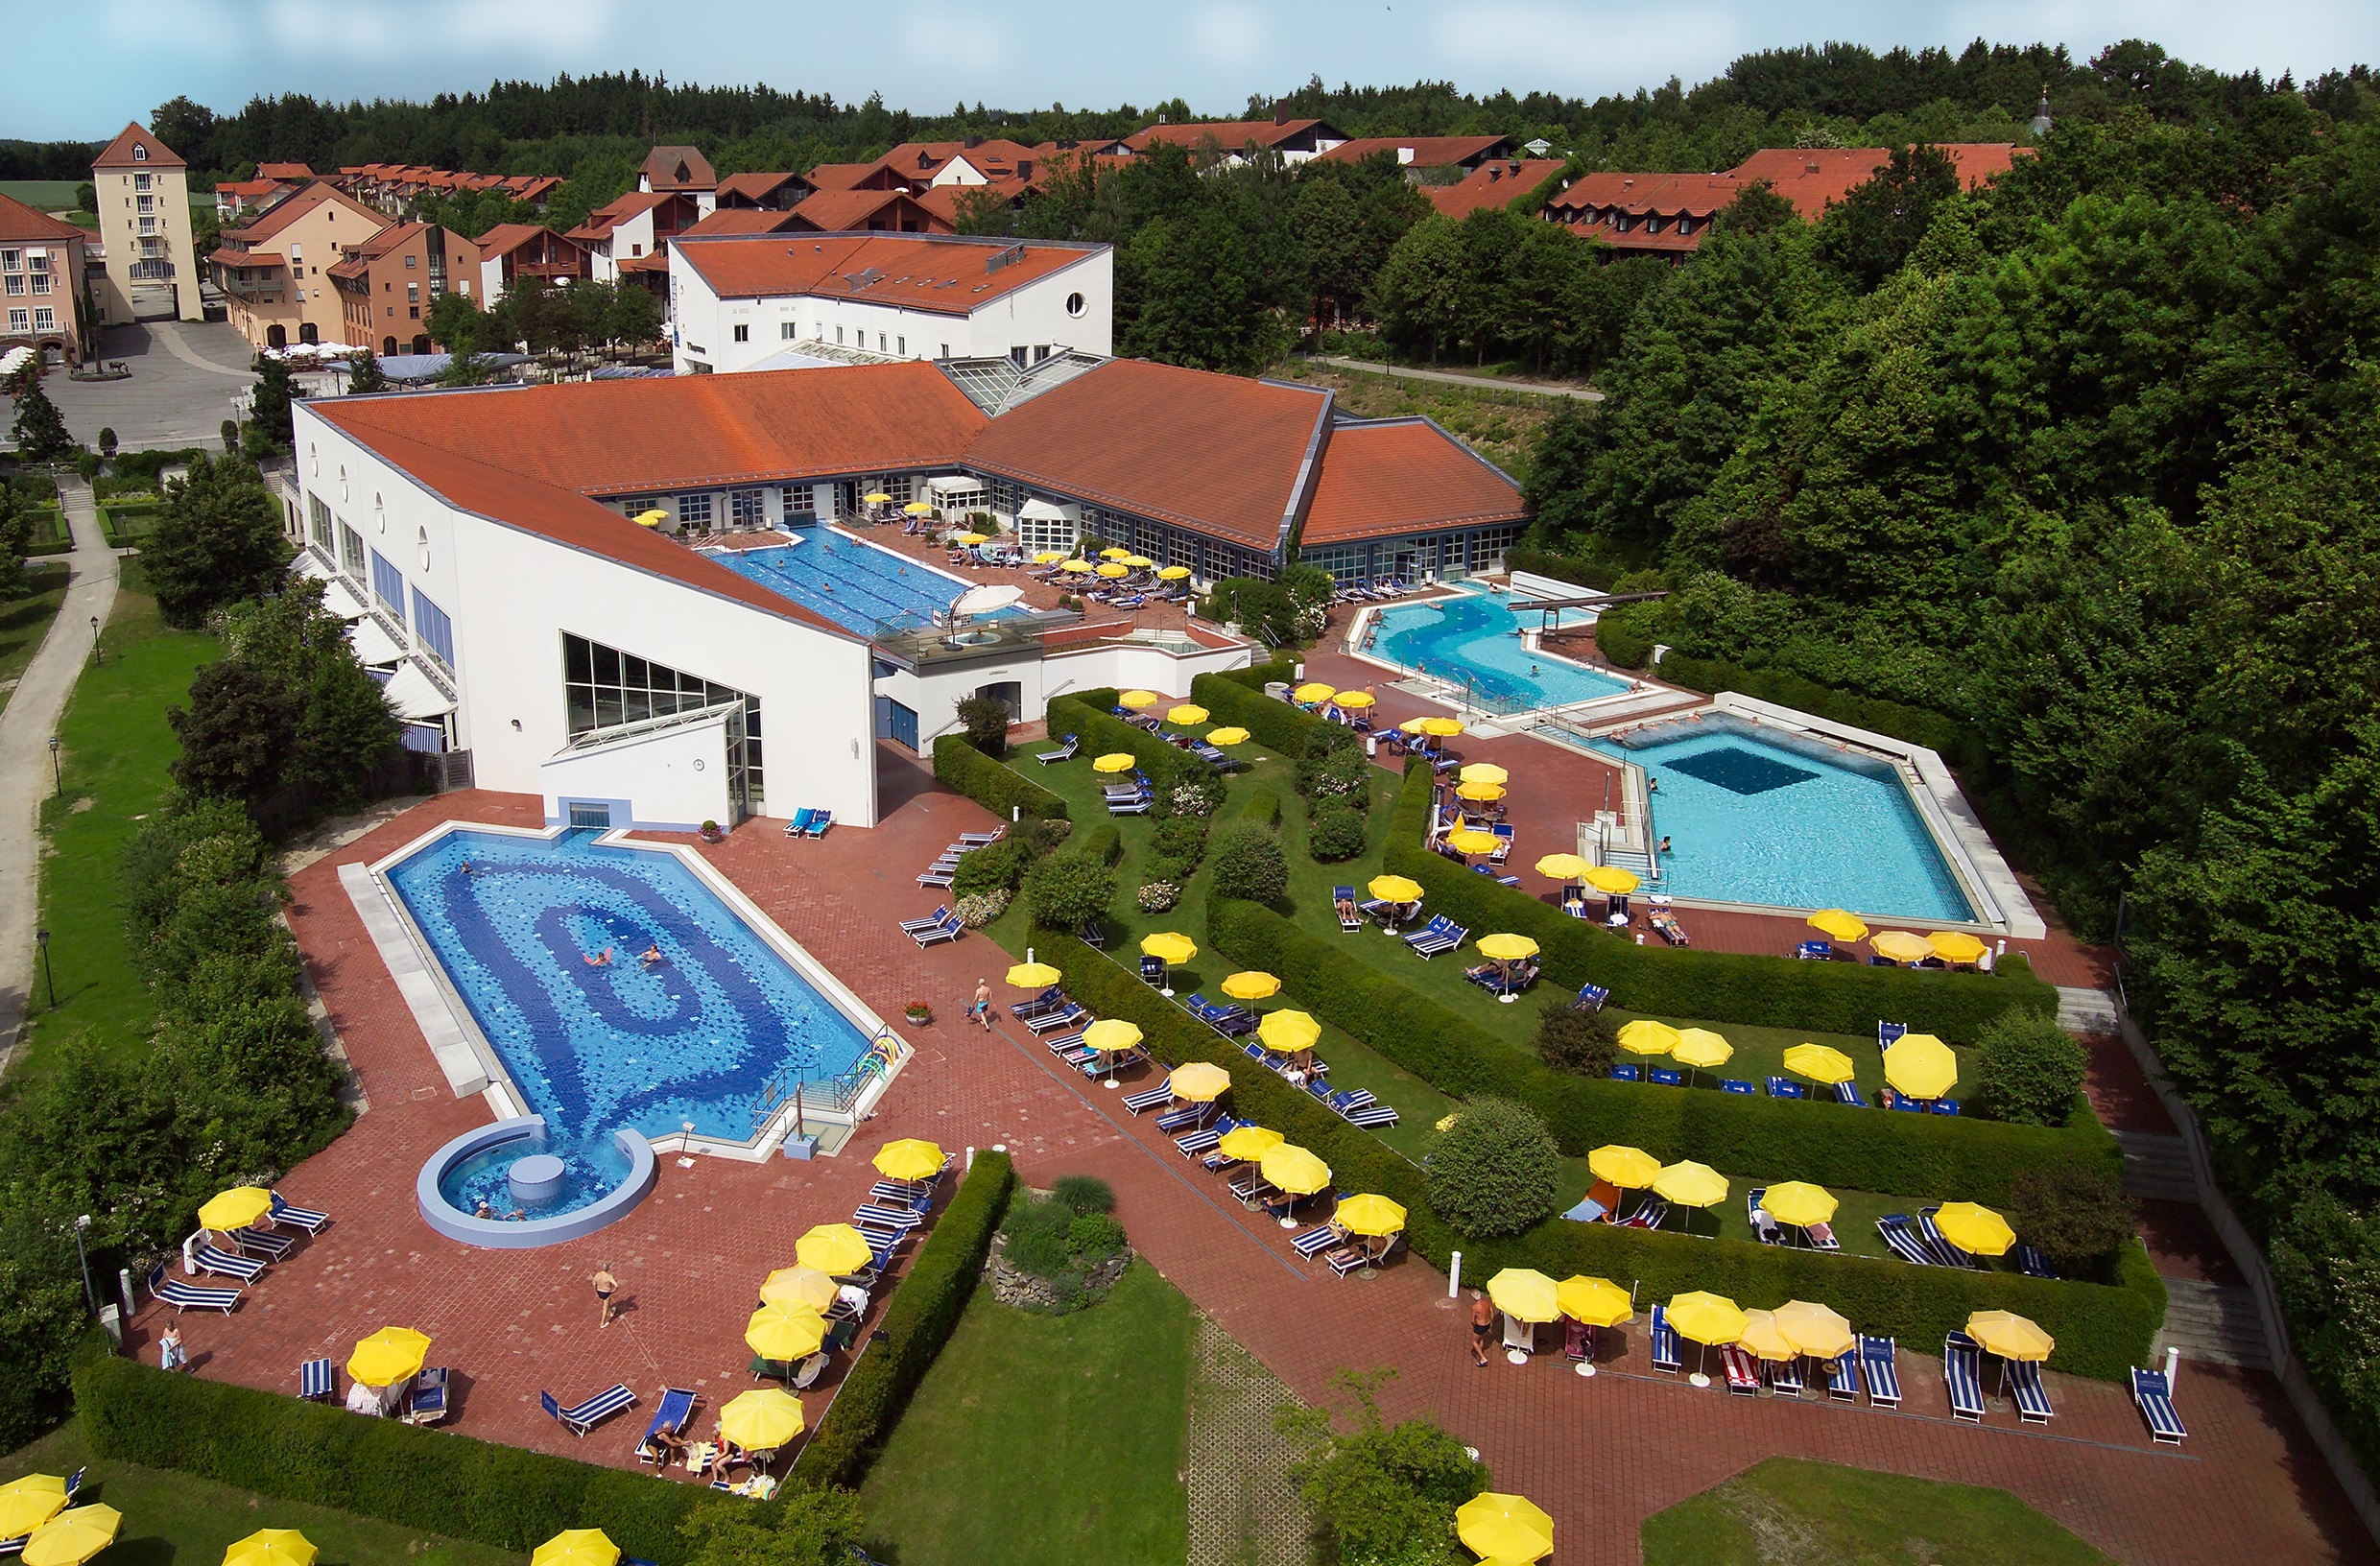 Wohlfühl-Therme Bad Griesbach.
